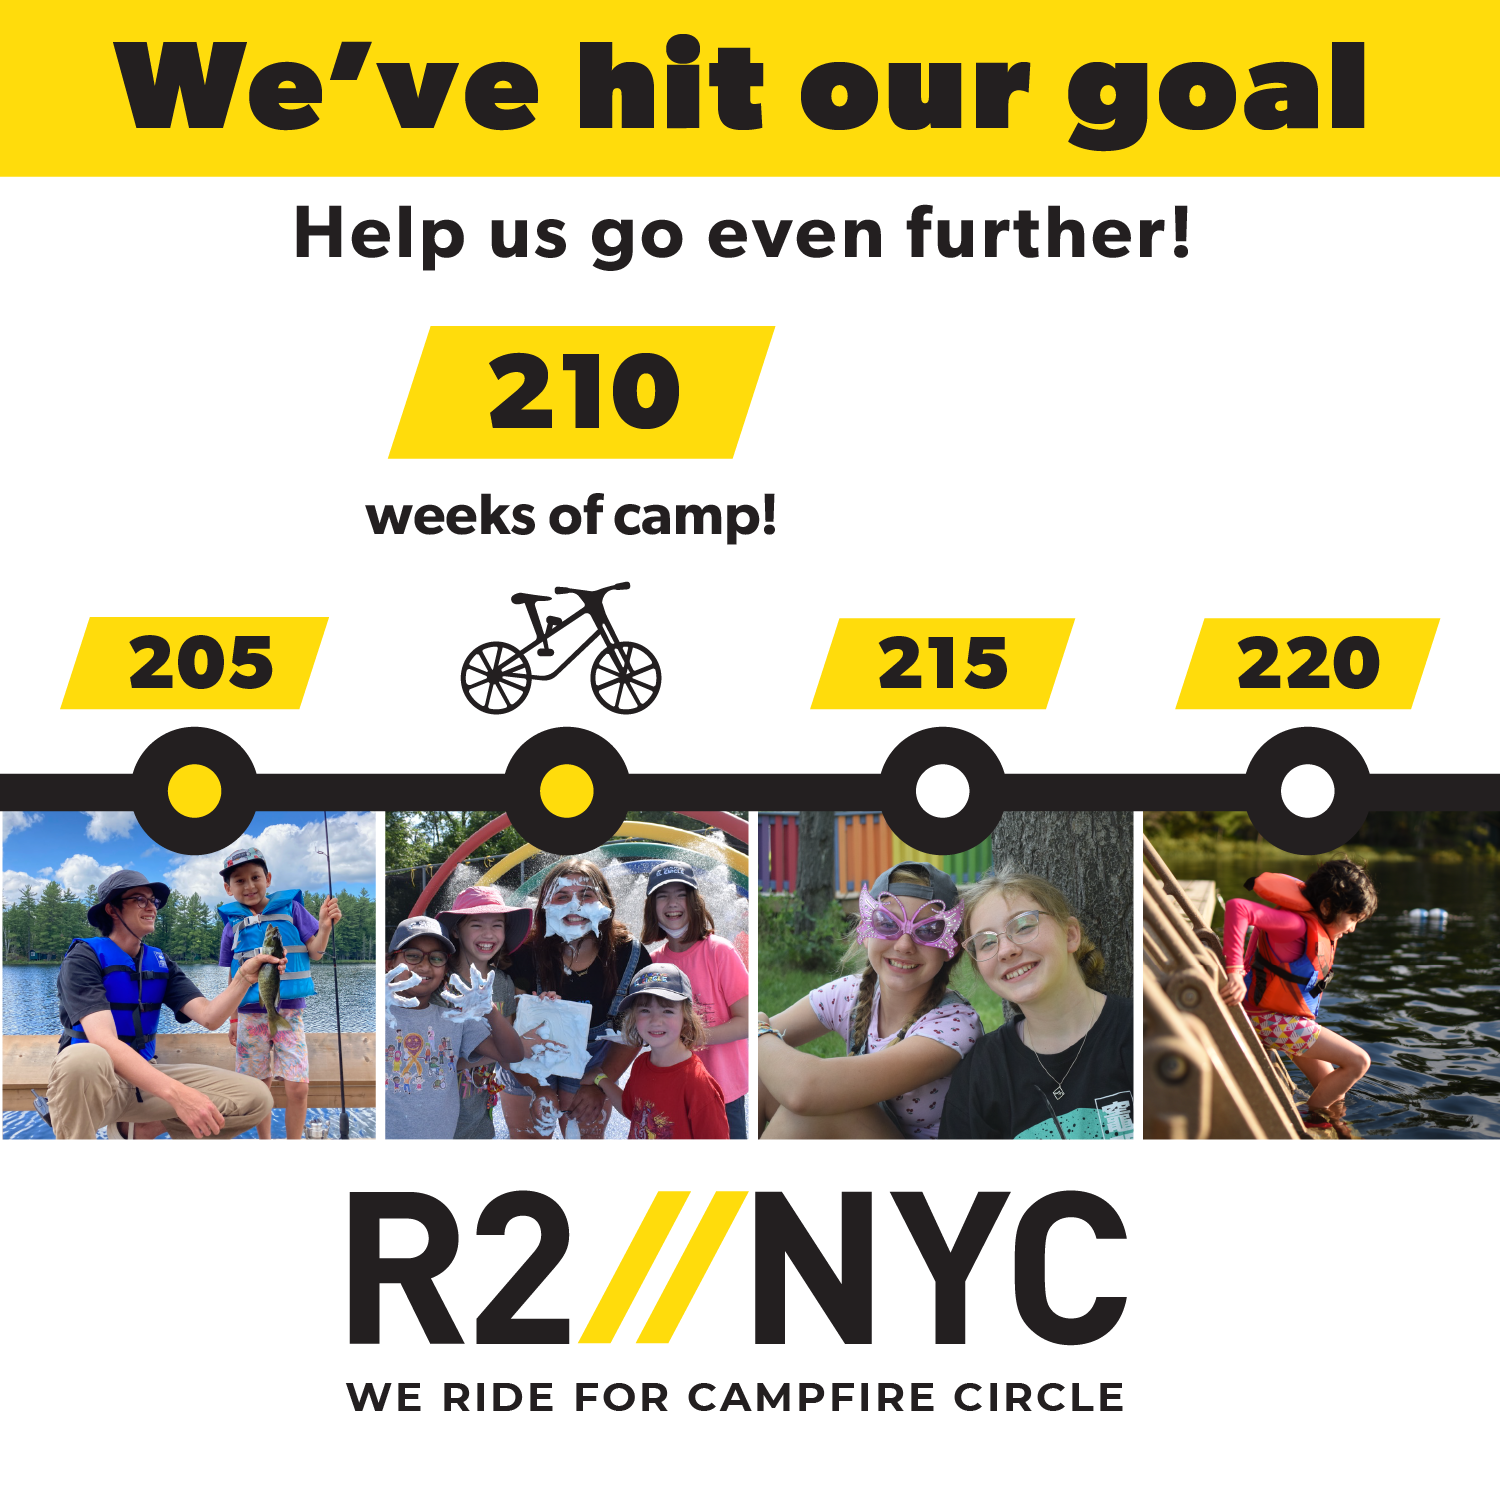 R2NYC We ride for Campfire Circle. We have raised enough funds to provide 210 weeks of camp